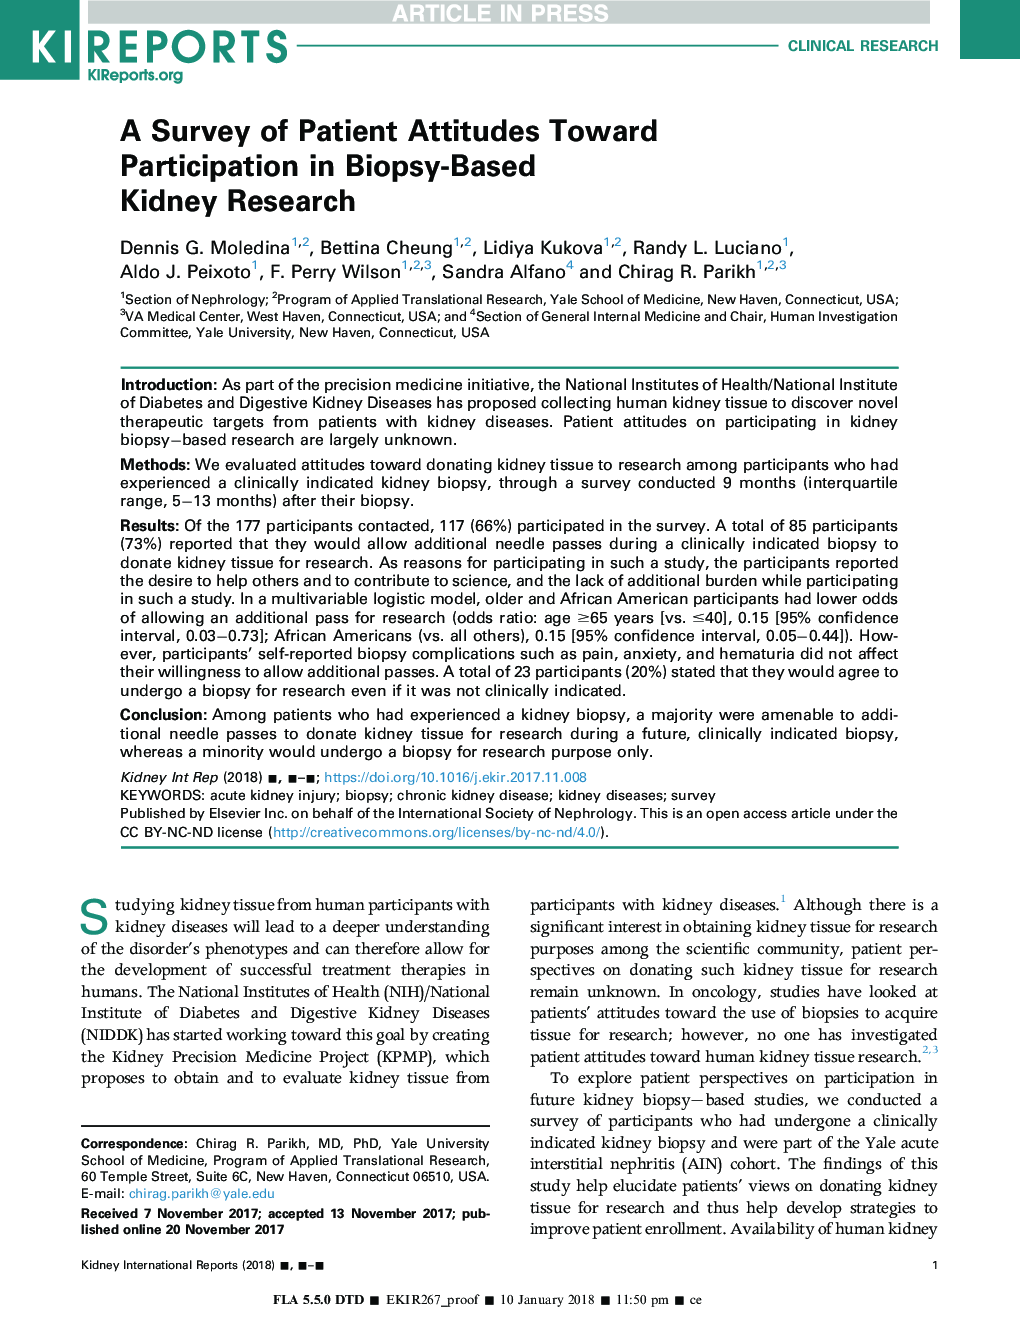 A Survey of Patient Attitudes Toward Participation in Biopsy-Based Kidney Research